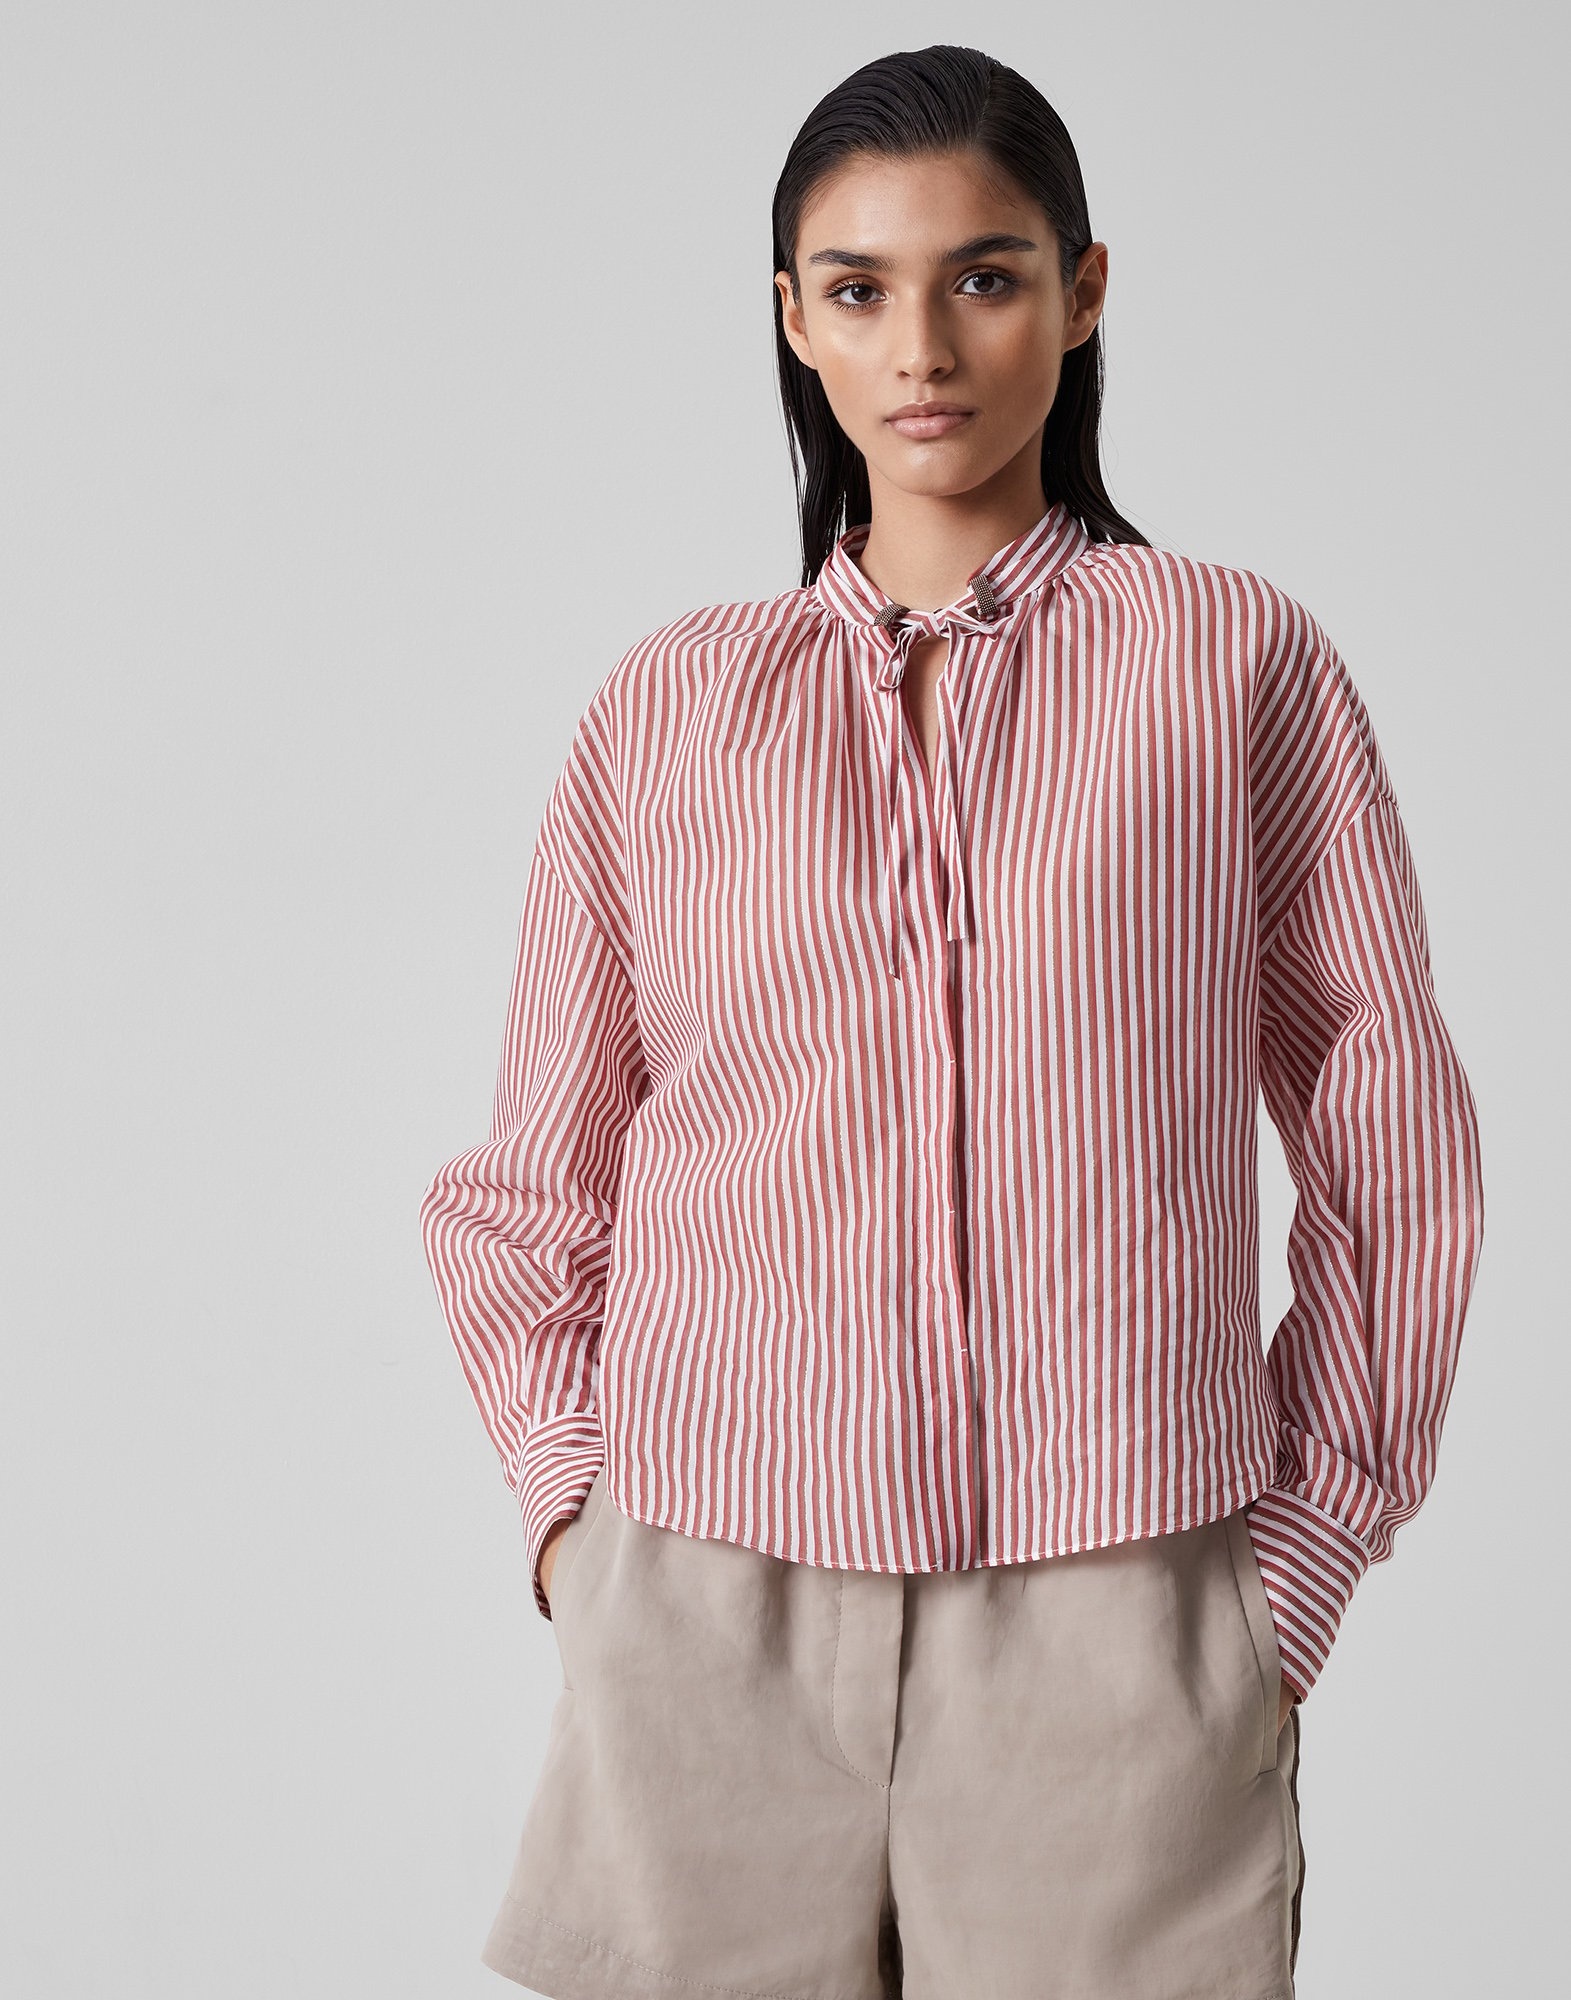 Sparkling cotton and silk striped shirt with shiny details - 1